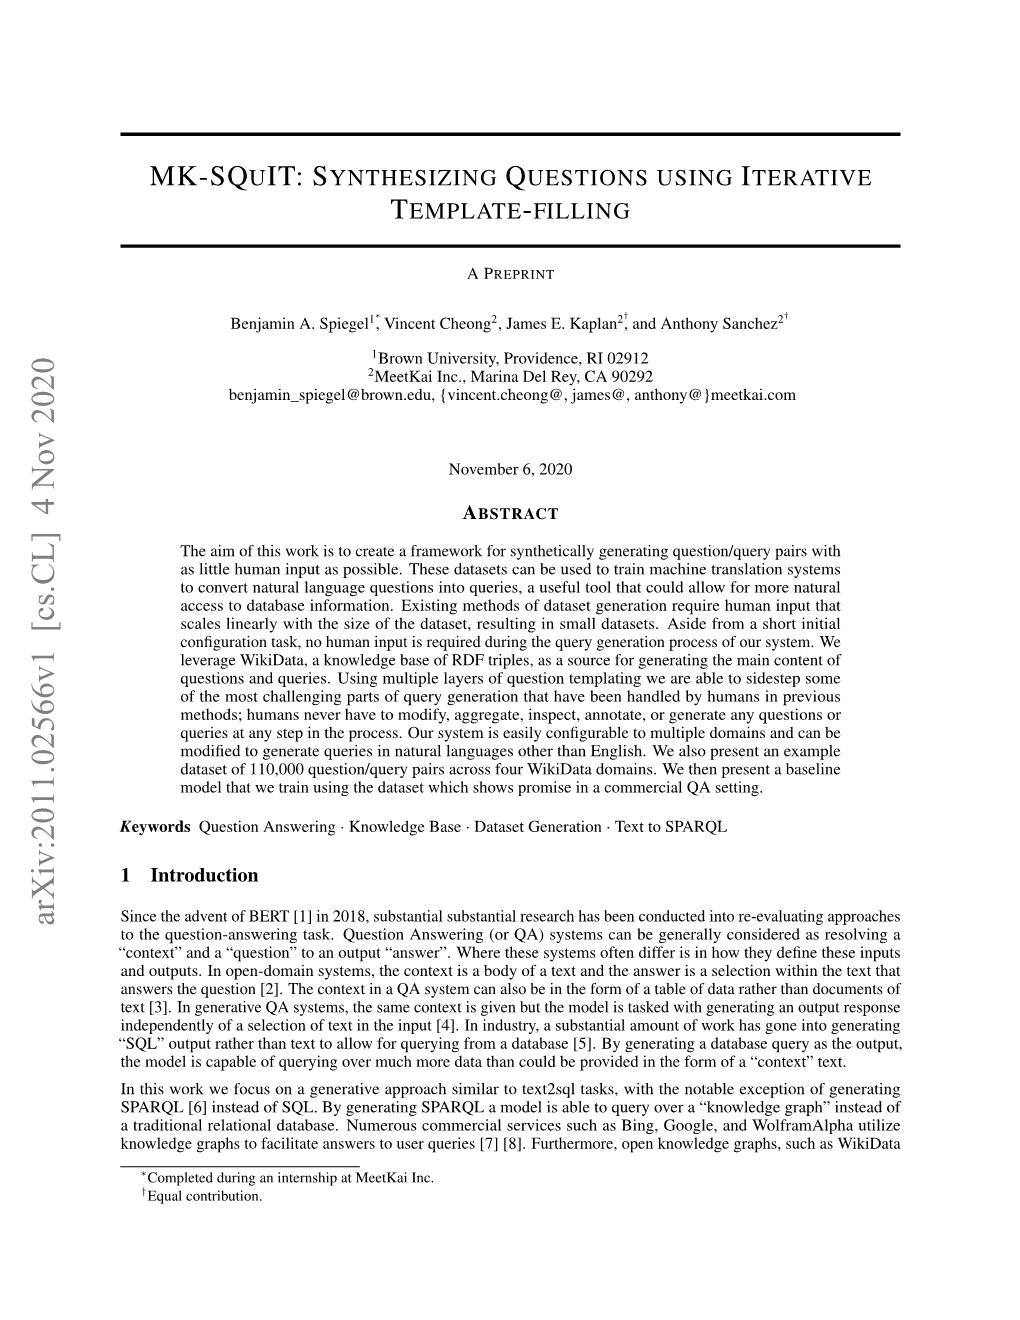 MK-Squit: Synthesizing Questions Using Iterative Template-Filling